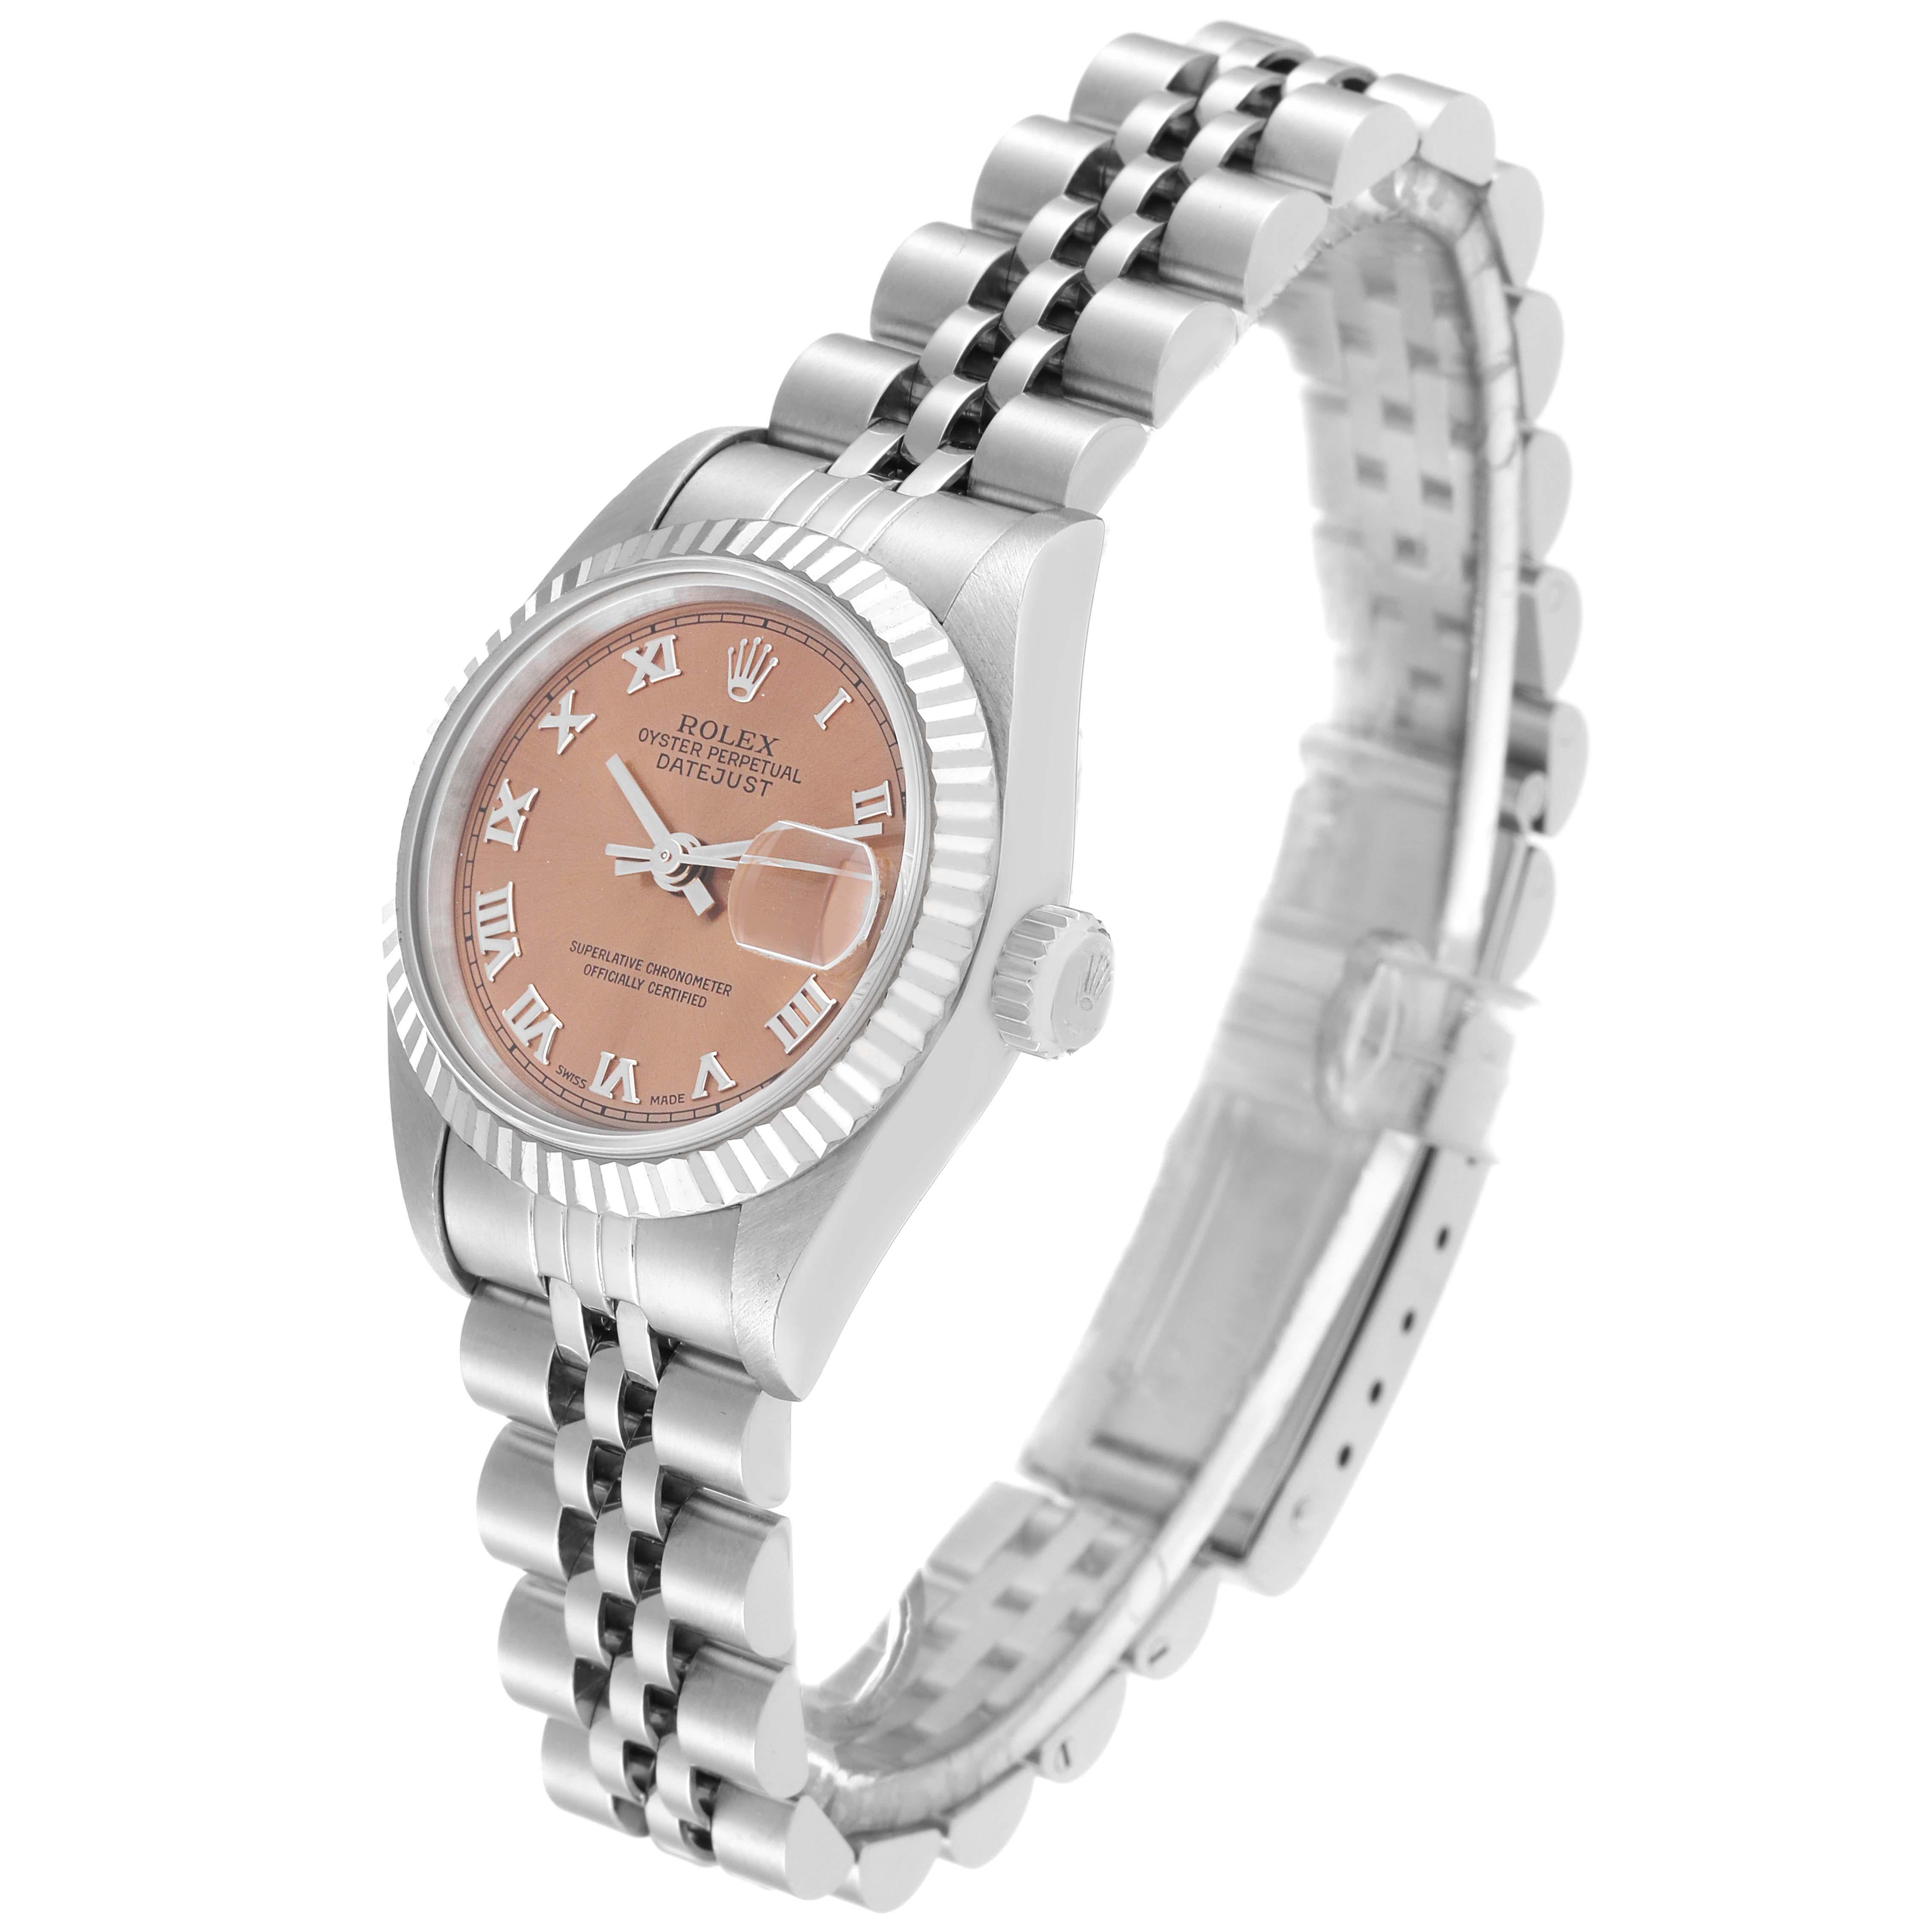 Women's Rolex Datejust Steel White Gold Salmon Dial Ladies Watch 69174 Box Papers